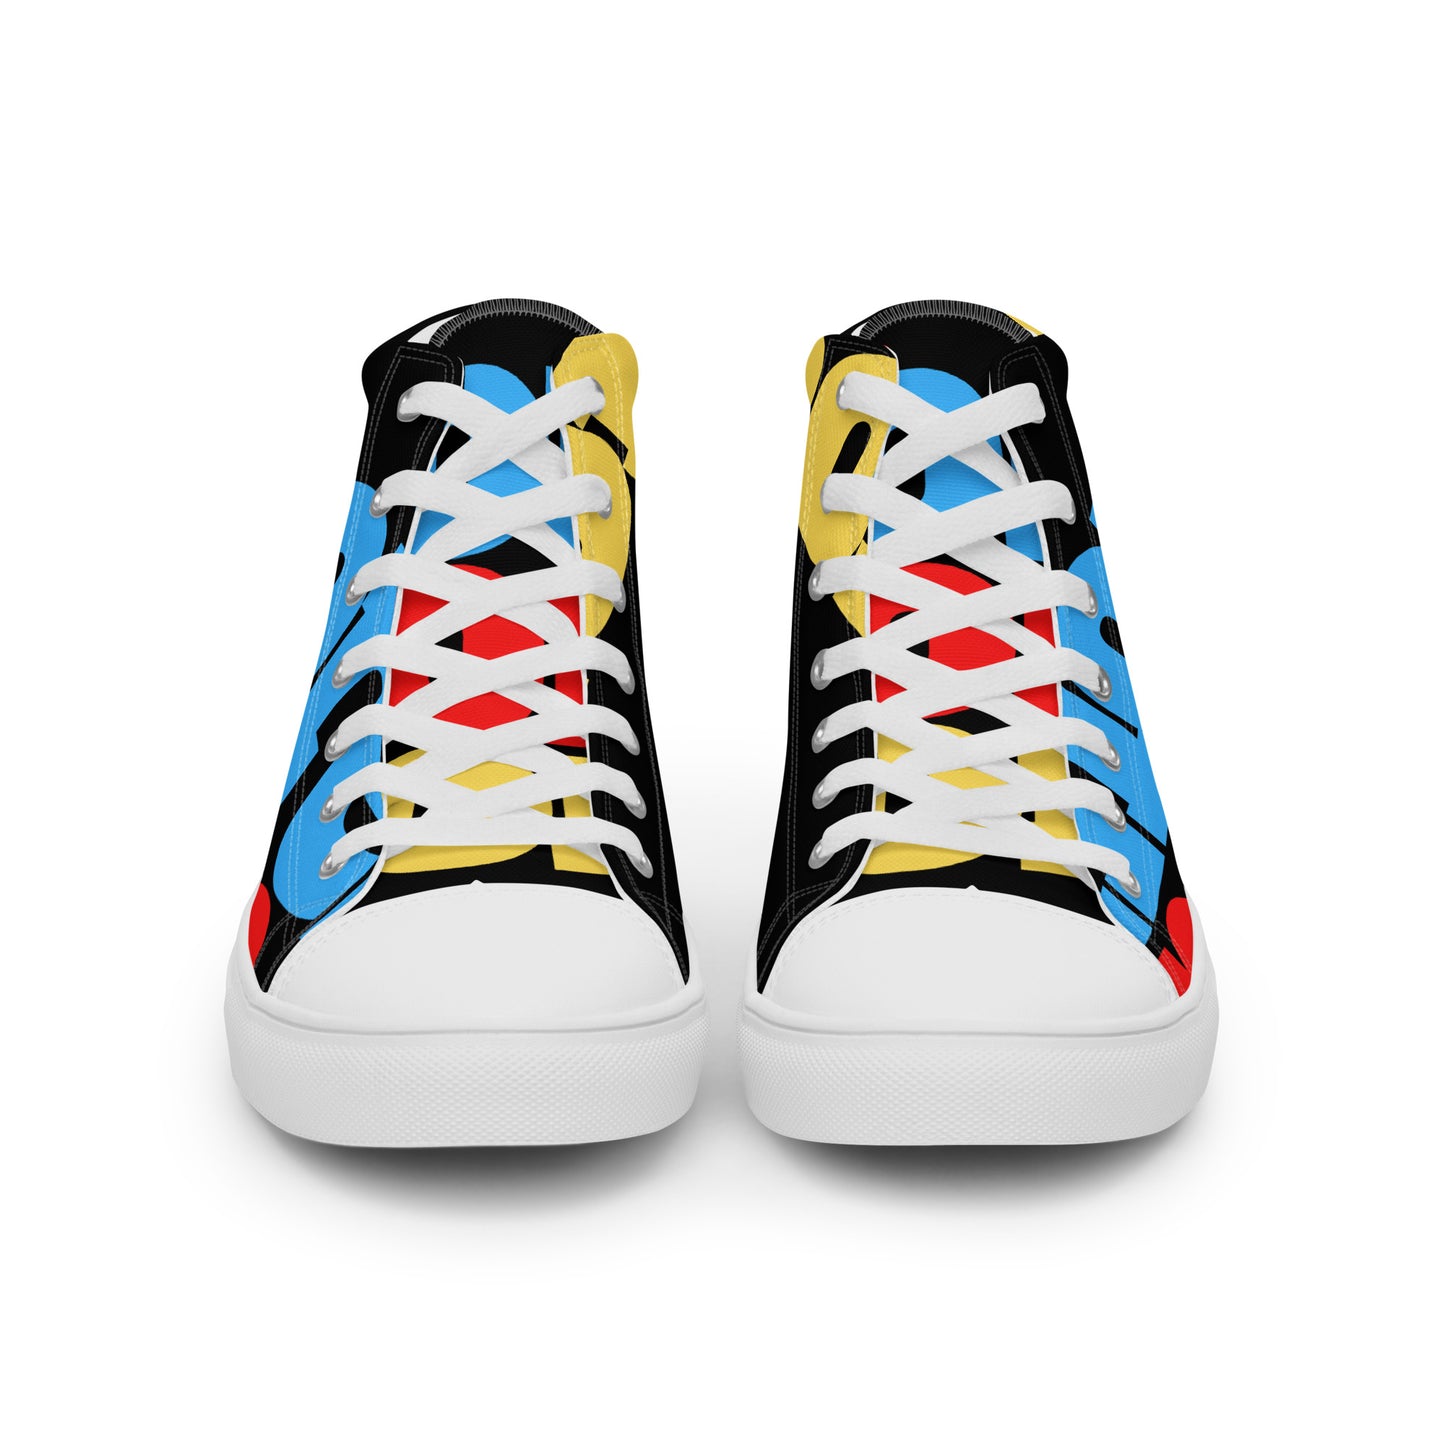 MORE Women’s high top canvas shoes - Beyond The Walls Int'l